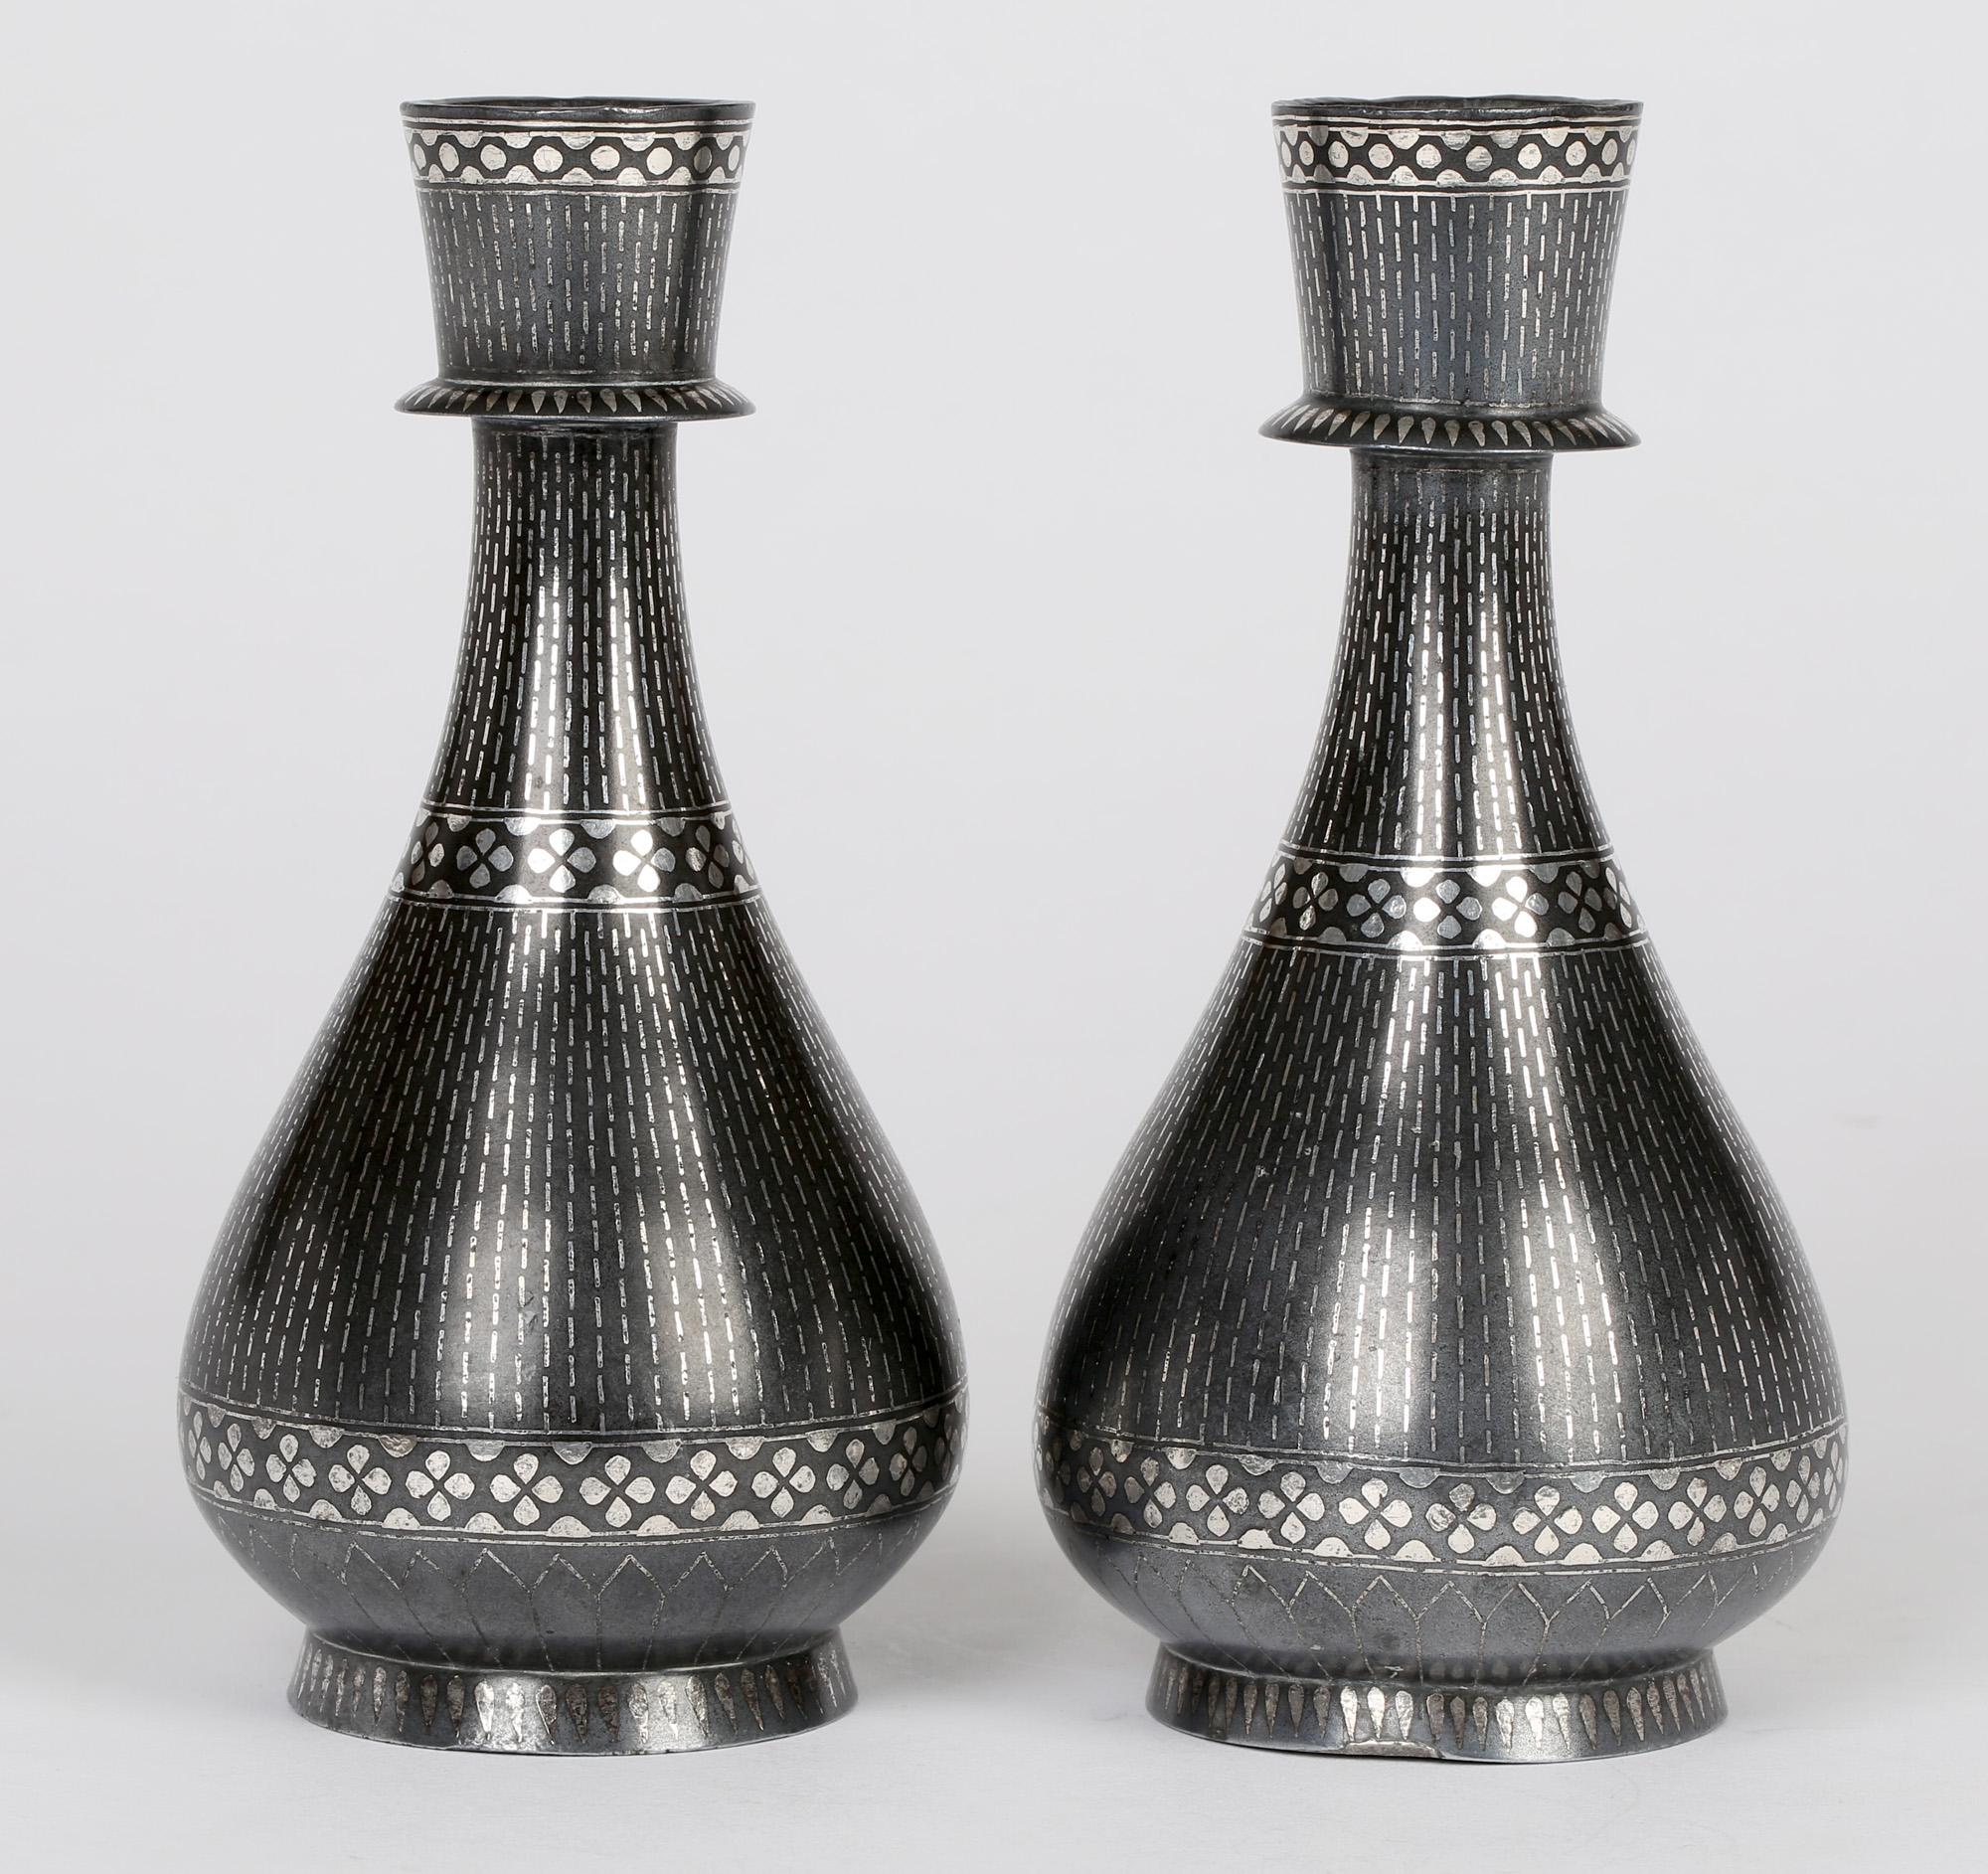 A very fine pair antique Indian Bidri Ware vases of teardrop shape with linear and floral petal designs in silver overlay probably dating from the late 19th century. The vases stands raised on a rounded pedestal foot with a tear drop shaped body,